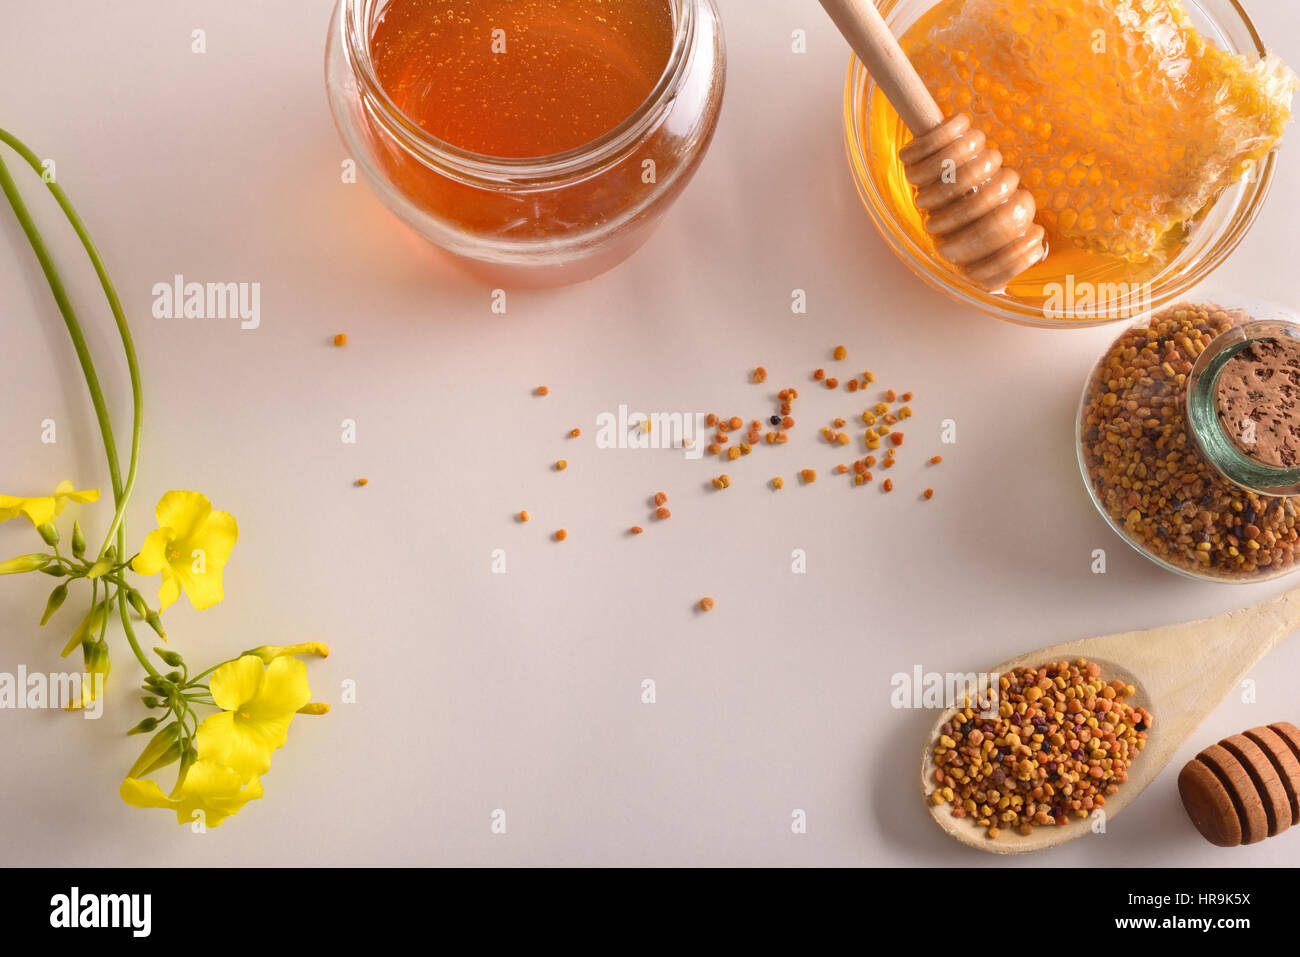 Containers with honey, honeycomb and pollen bee. Decoration with flowers and pollen grains. Top view. Horizontal composition Stock Photo